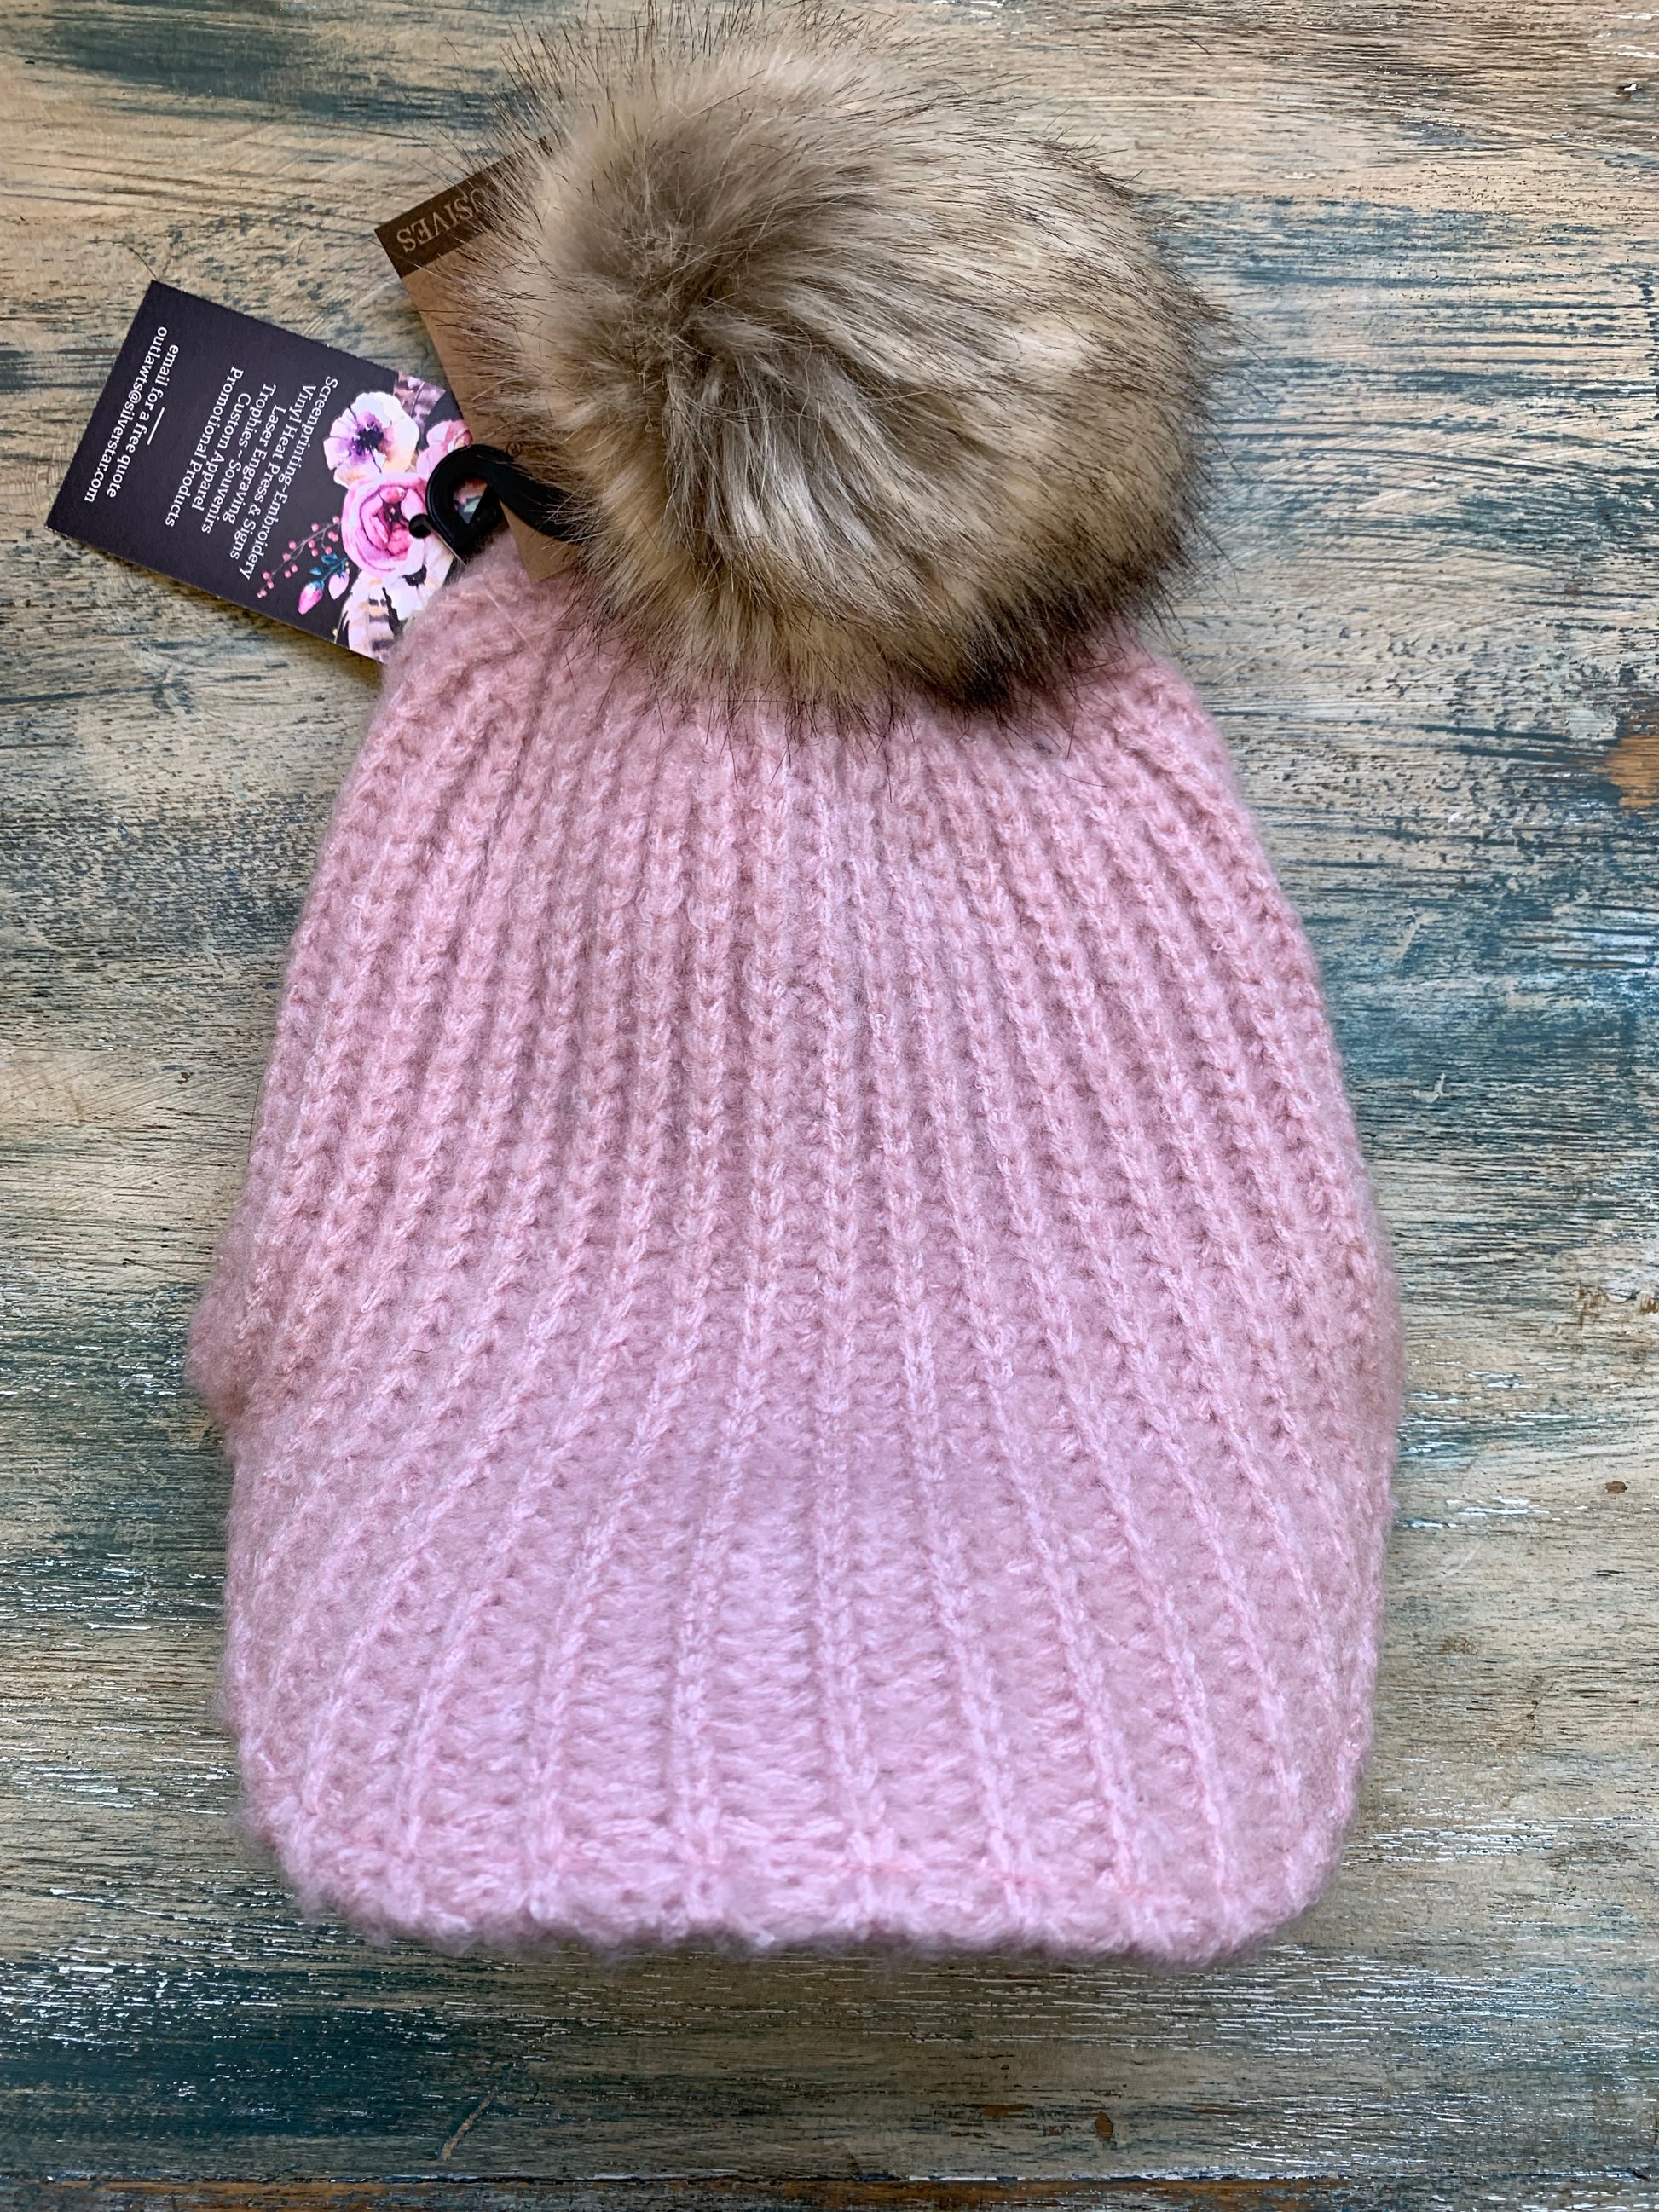 Knit Hat - Handmade Knit Beanie - Fur Pom Pom - Chunky Knit - Winter Hat - CC Beanie - Hat for Women — Brittany's Buttons